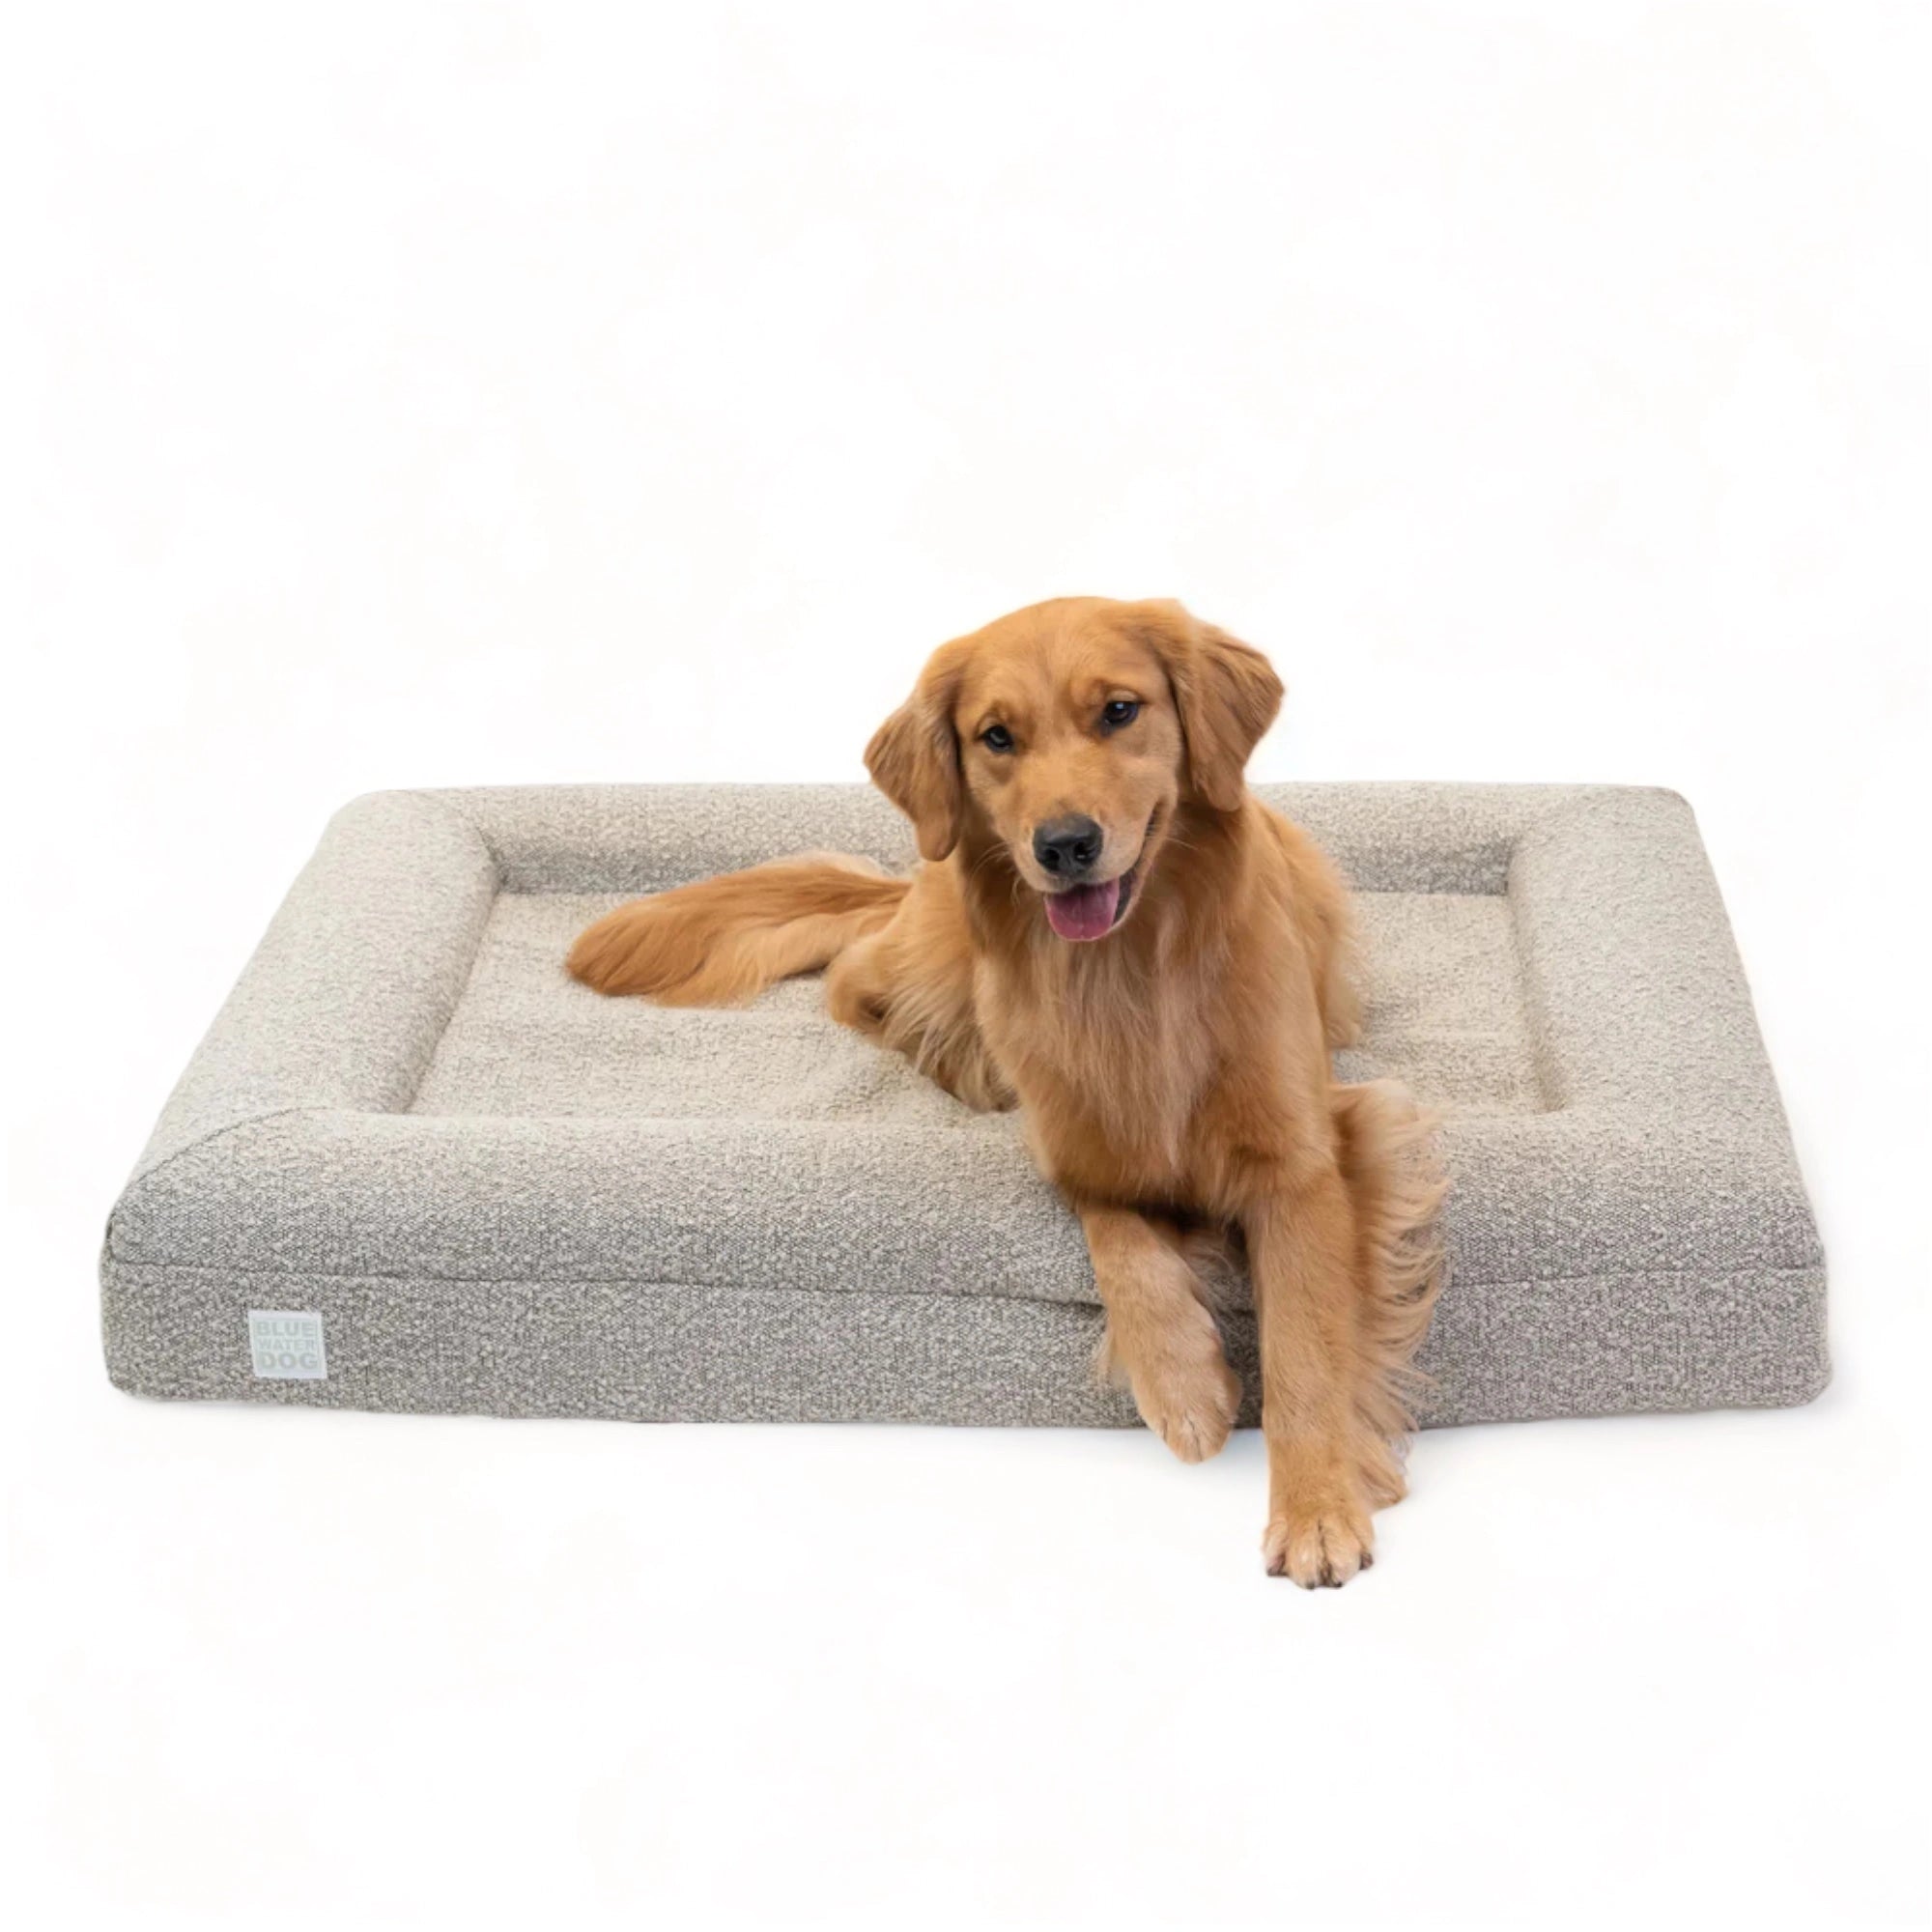 Golden Retriever laying on a large, sand-colored orthopedic memory foam boucle dog bed